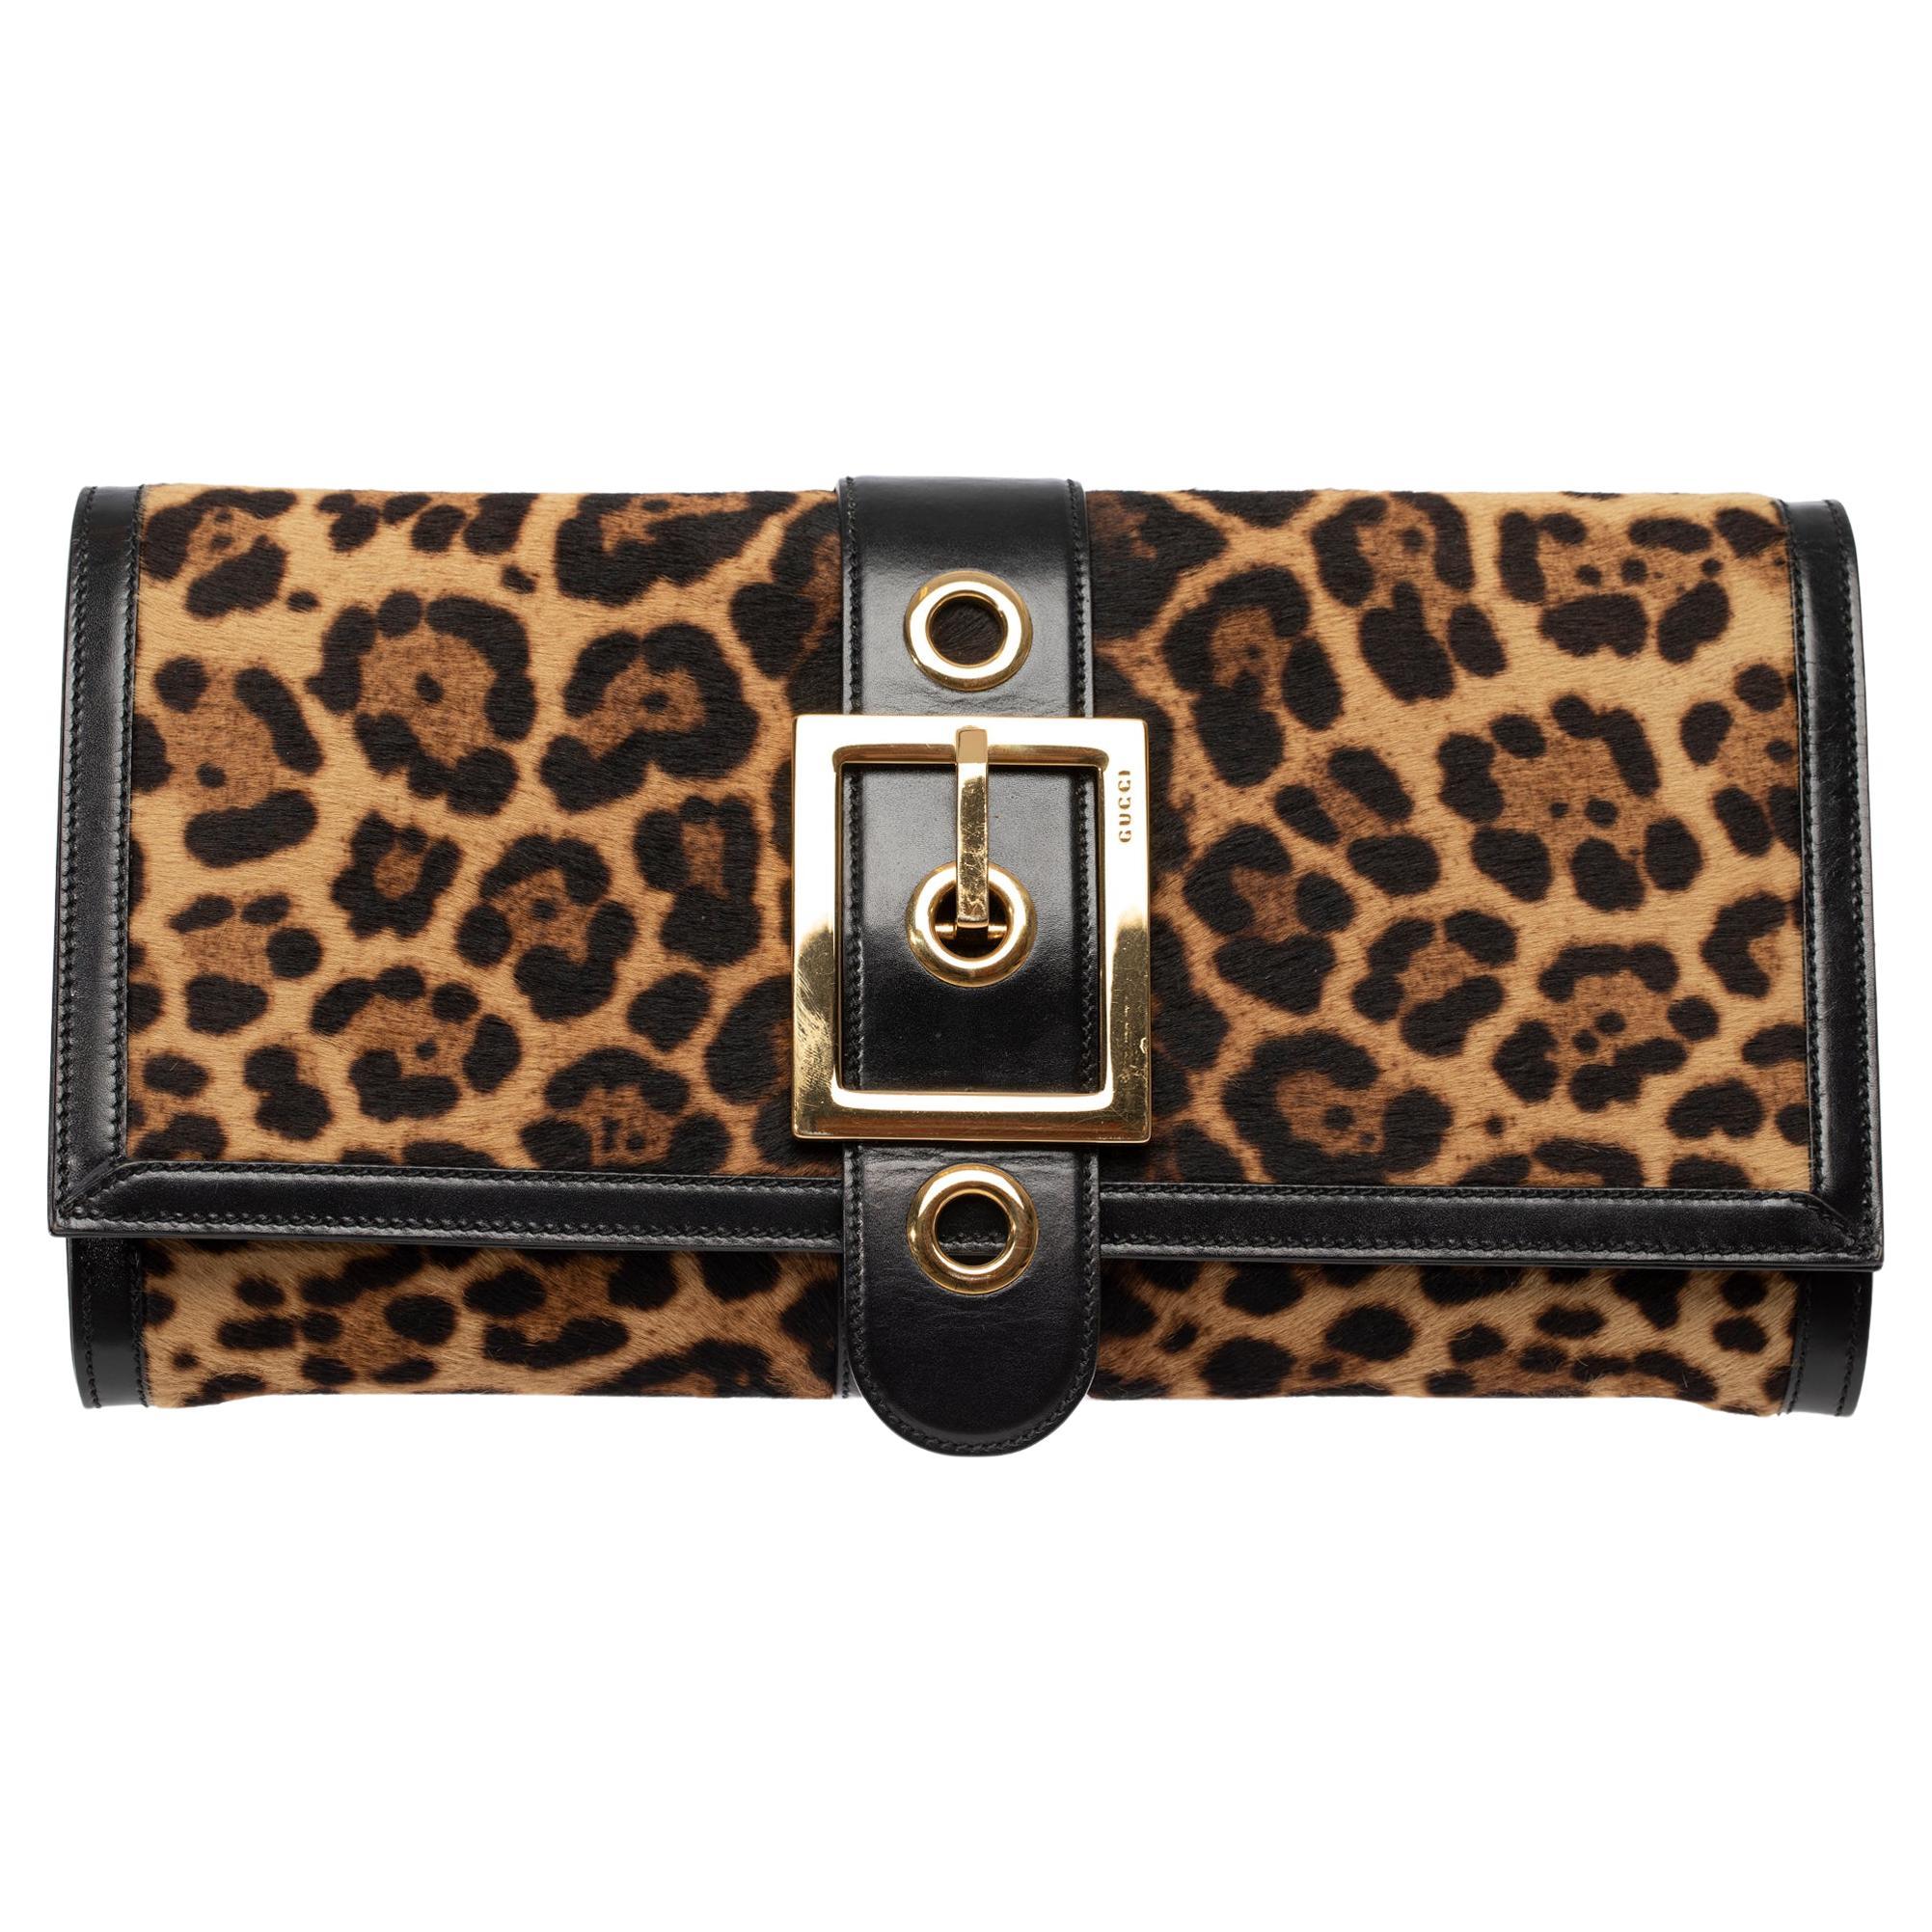 Gucci Clutch With Leopard Print Gold Tone Hardware For Sale